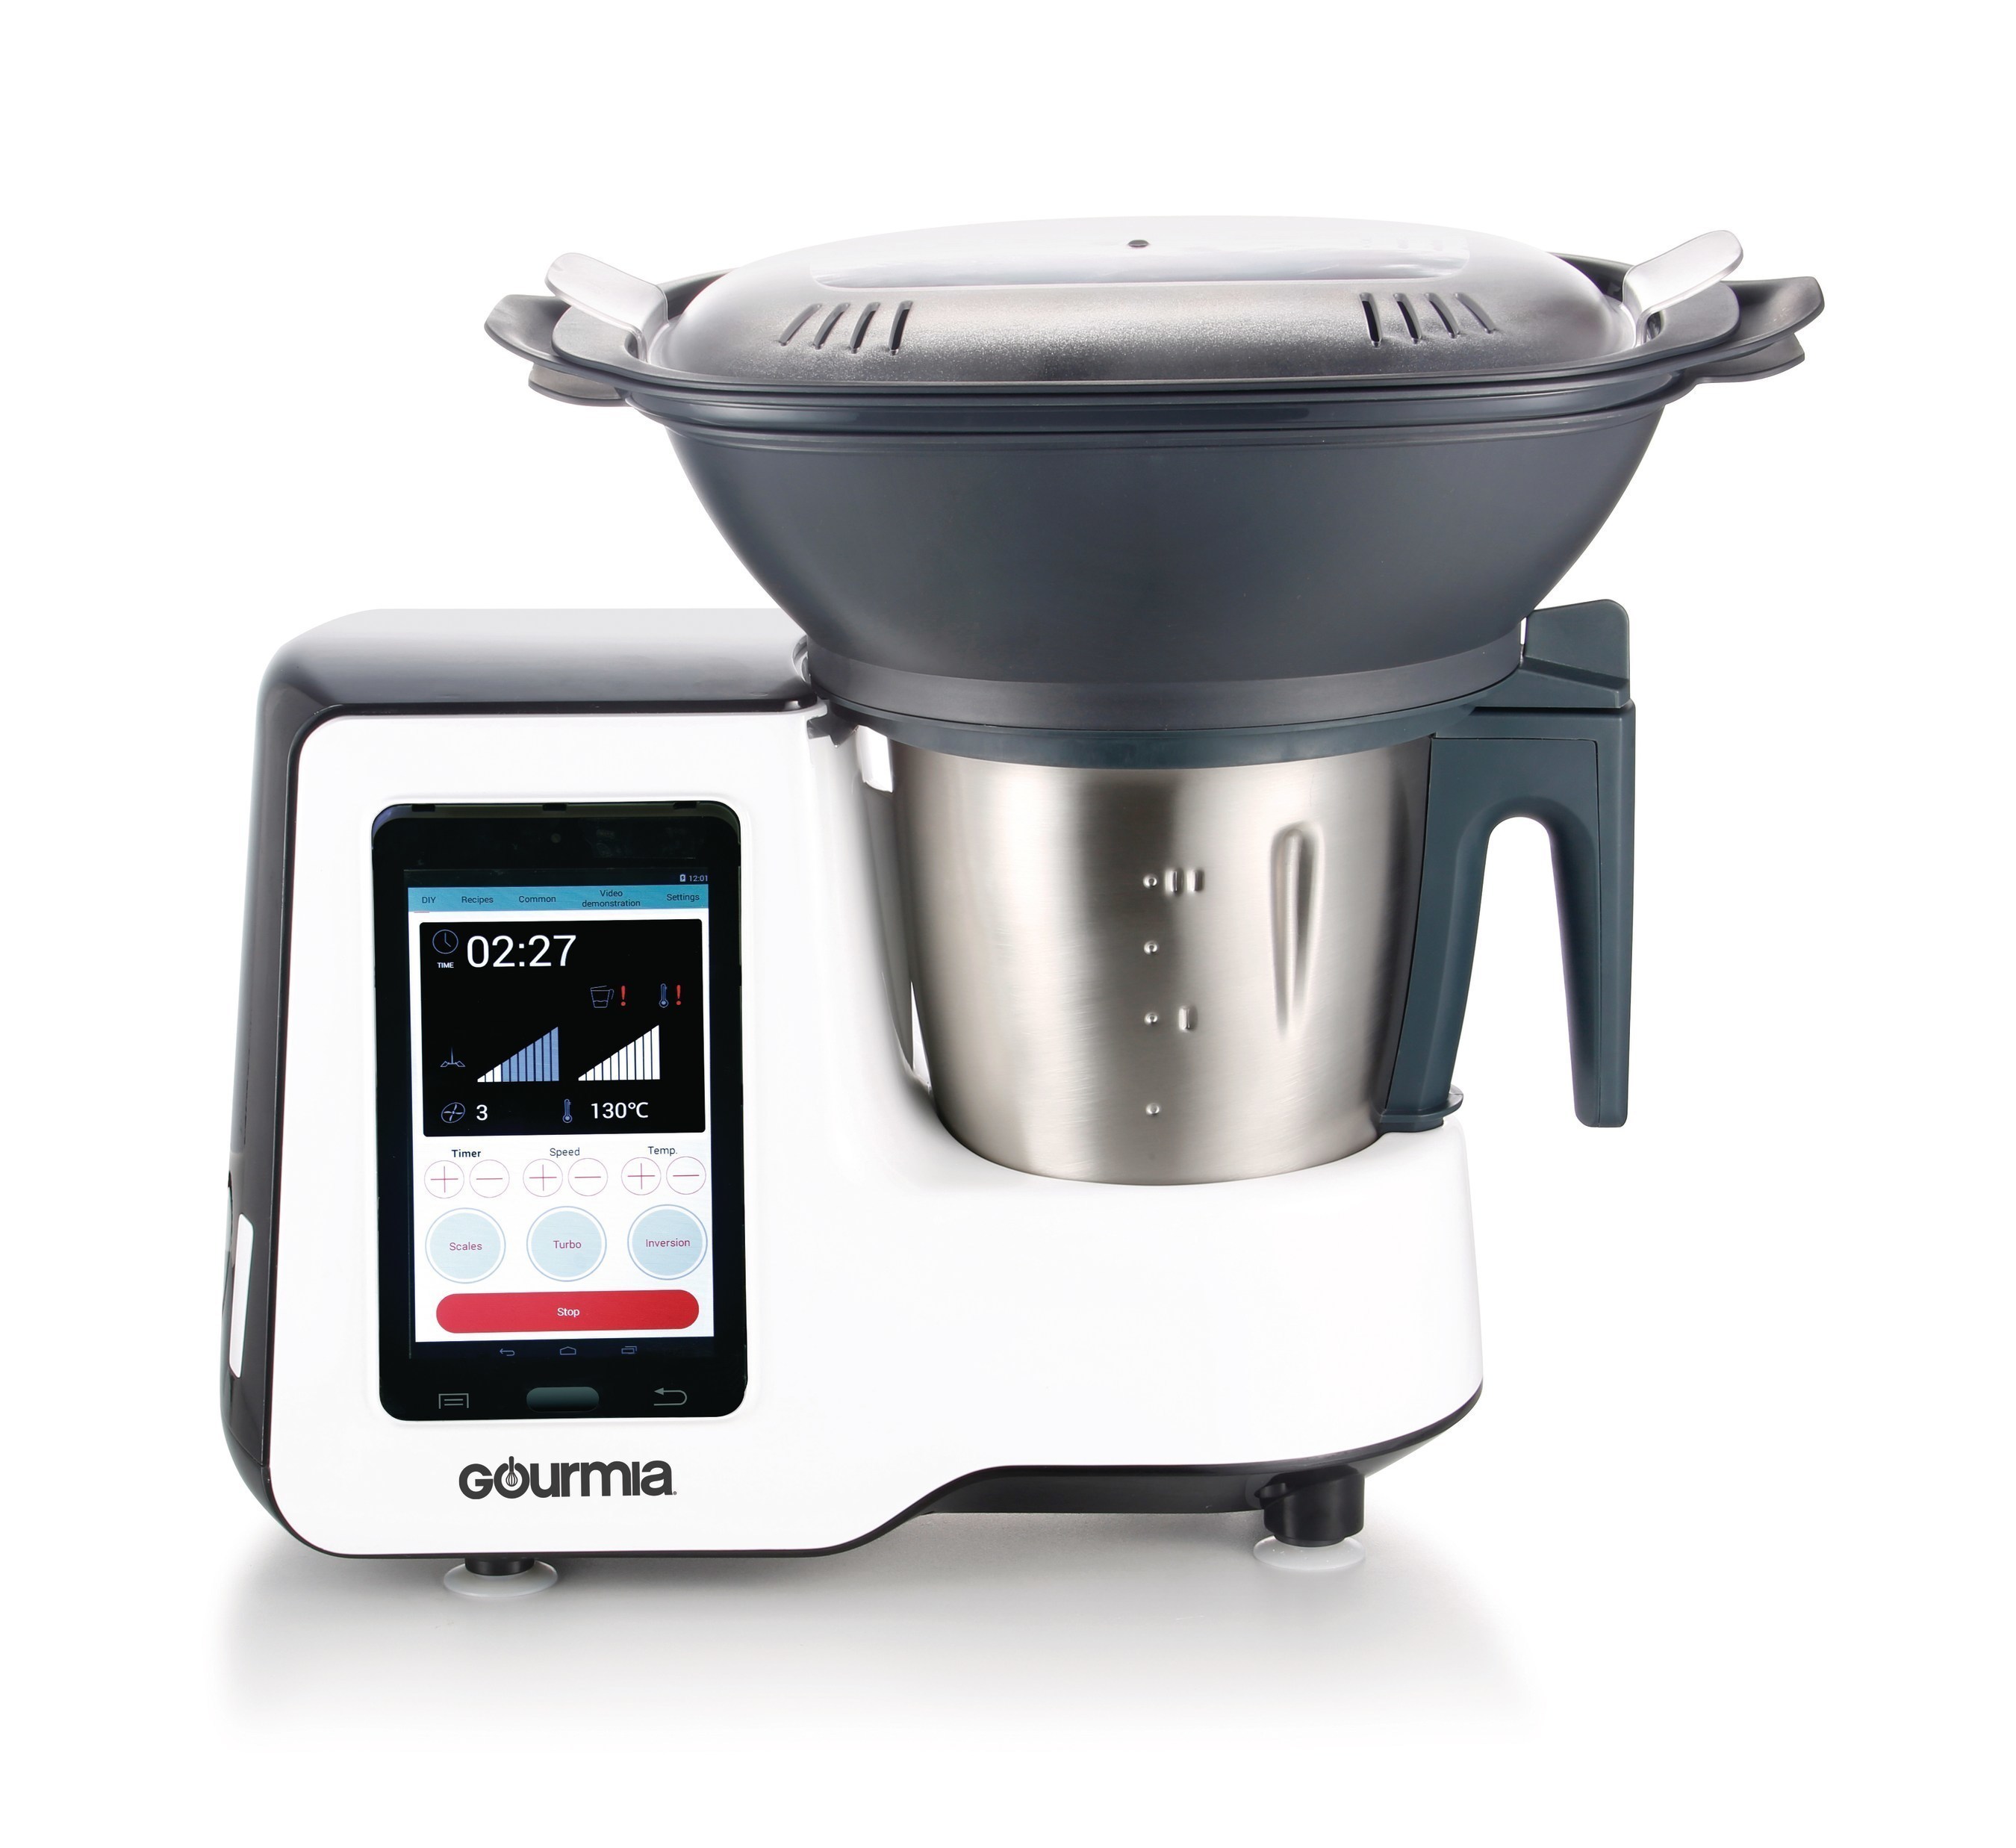 The new Gourmia GKM9000 multi-cooker kitchen machine guides cooks step-by-step through pre-programmed recipes and handles every part of the process, from chopping and mixing to cooking.